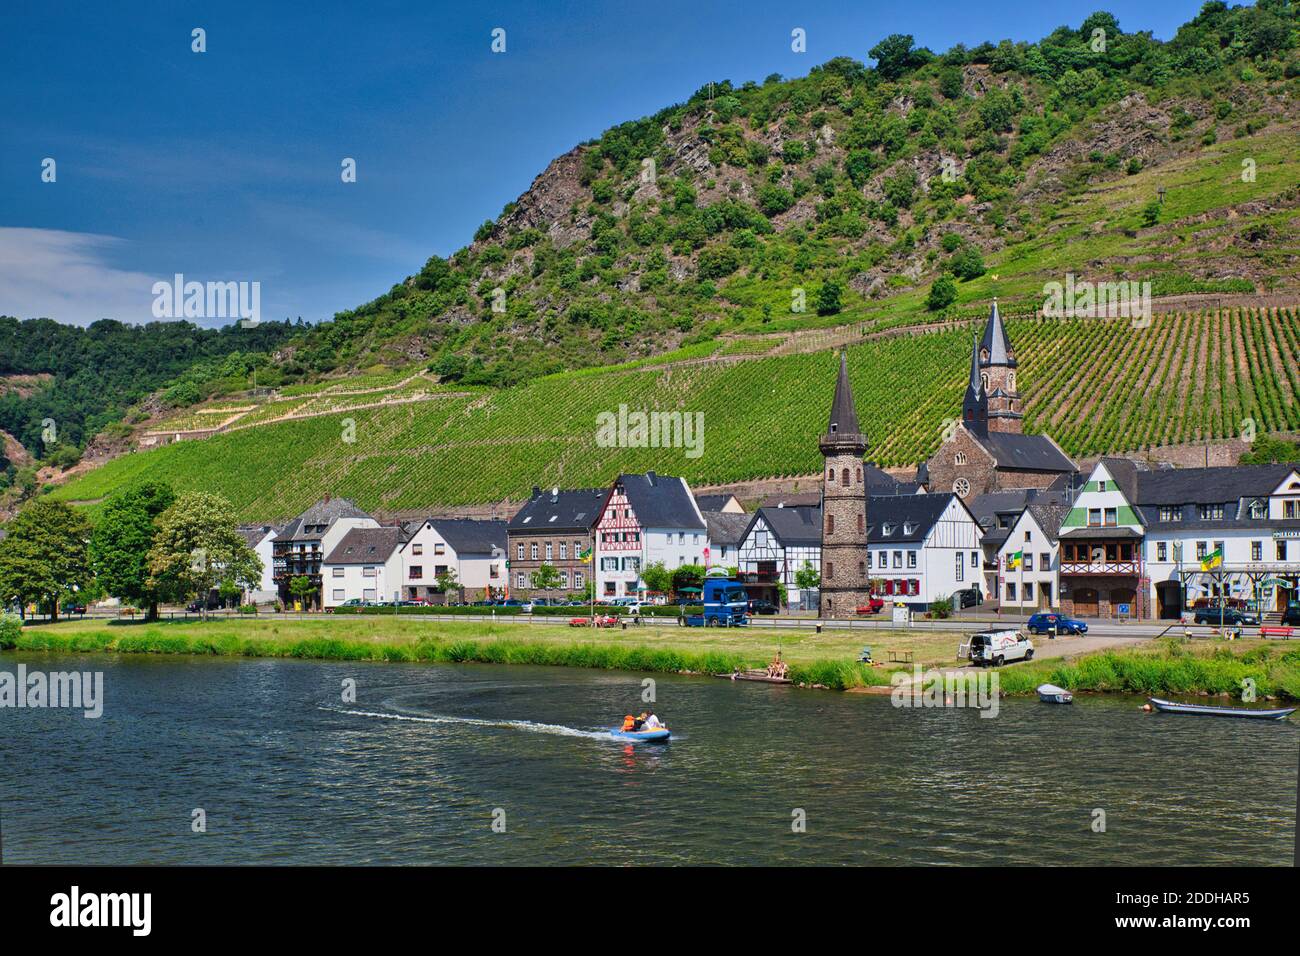 A view from the River Rhine in Germany of a townscape on the river bank with circular round tower in the foreground and green hillside slopes Stock Photo